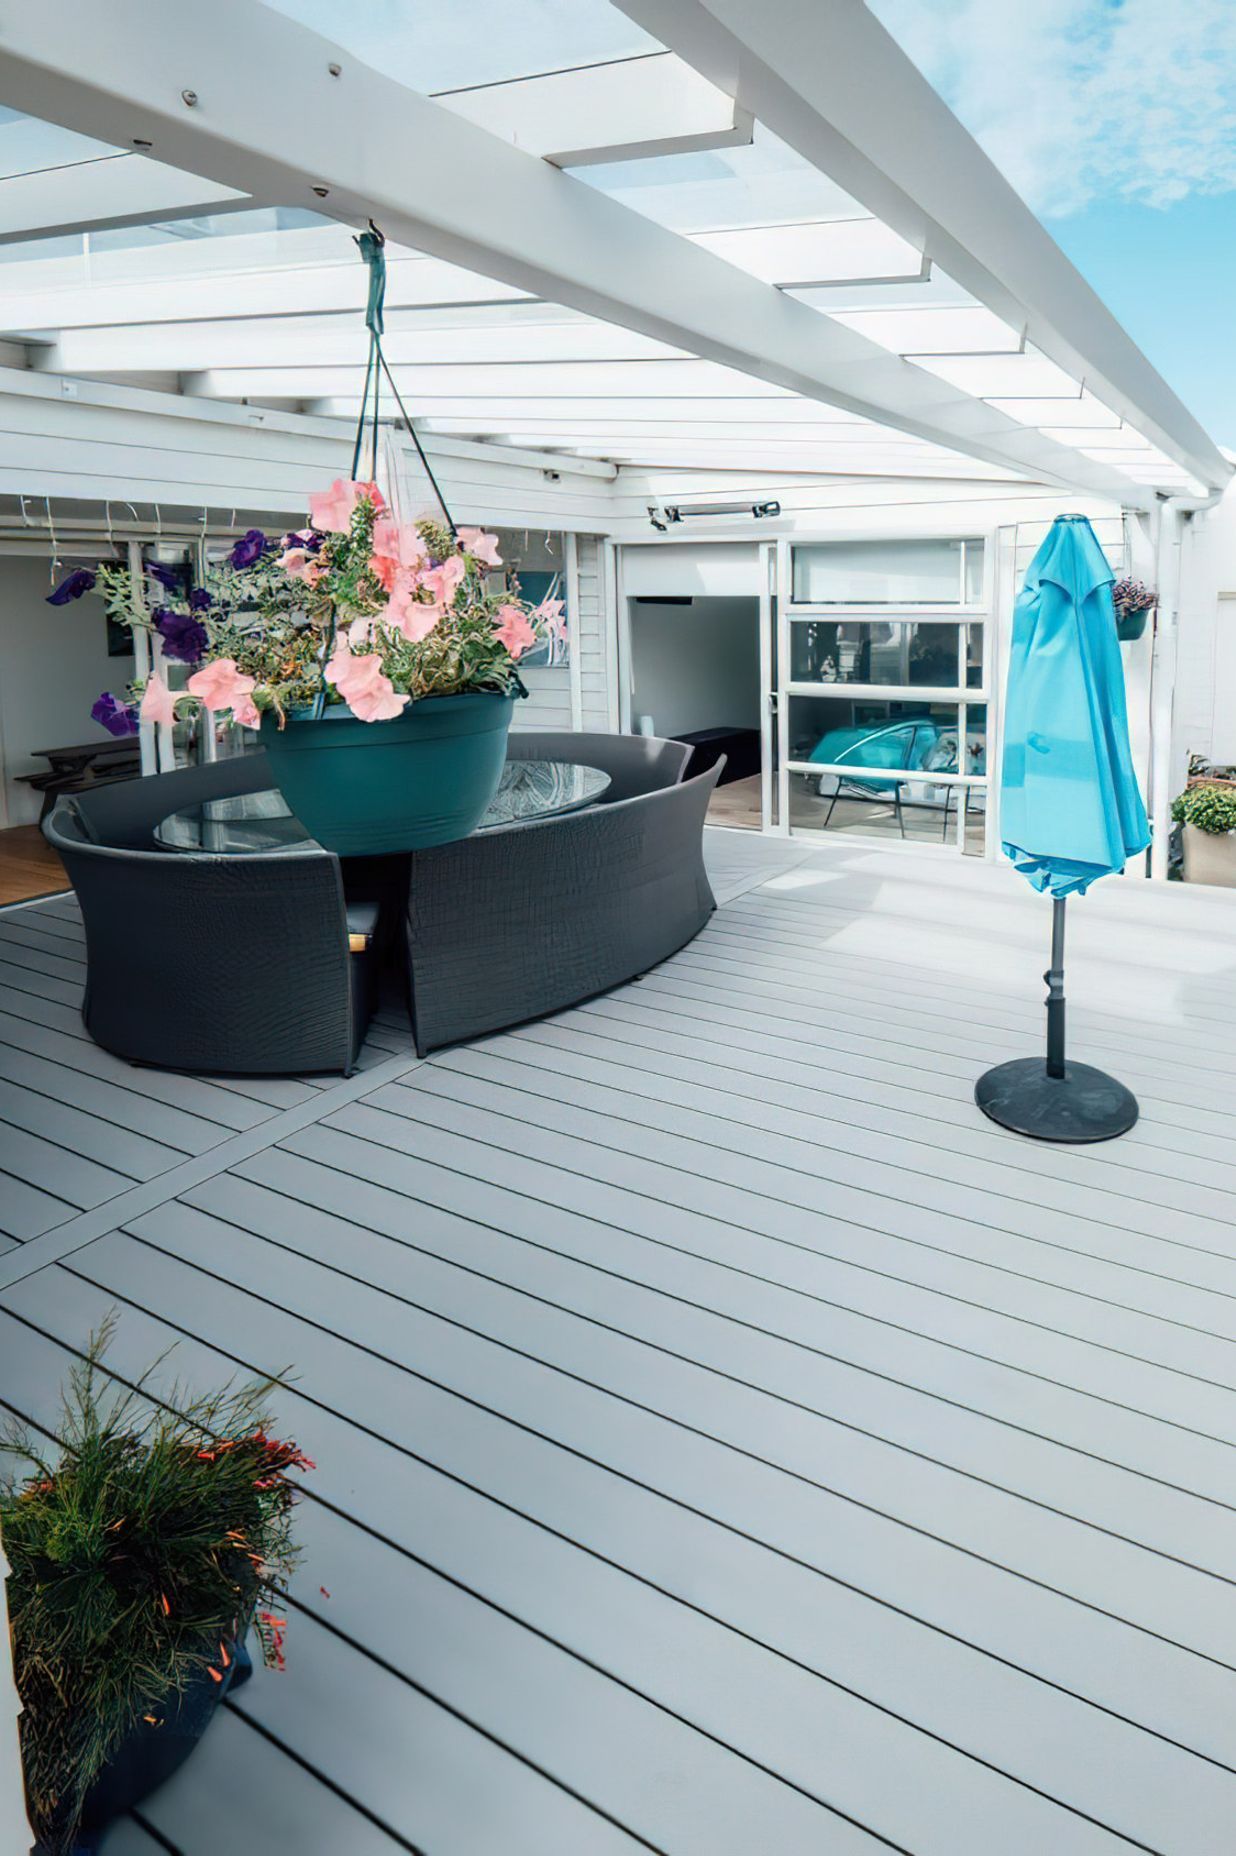 FUTUREWOOD-PROVIDES-A-COST-EFFECTIVE-DECKING-ALTER4-gigapixel-standard-scale-250x.jpg